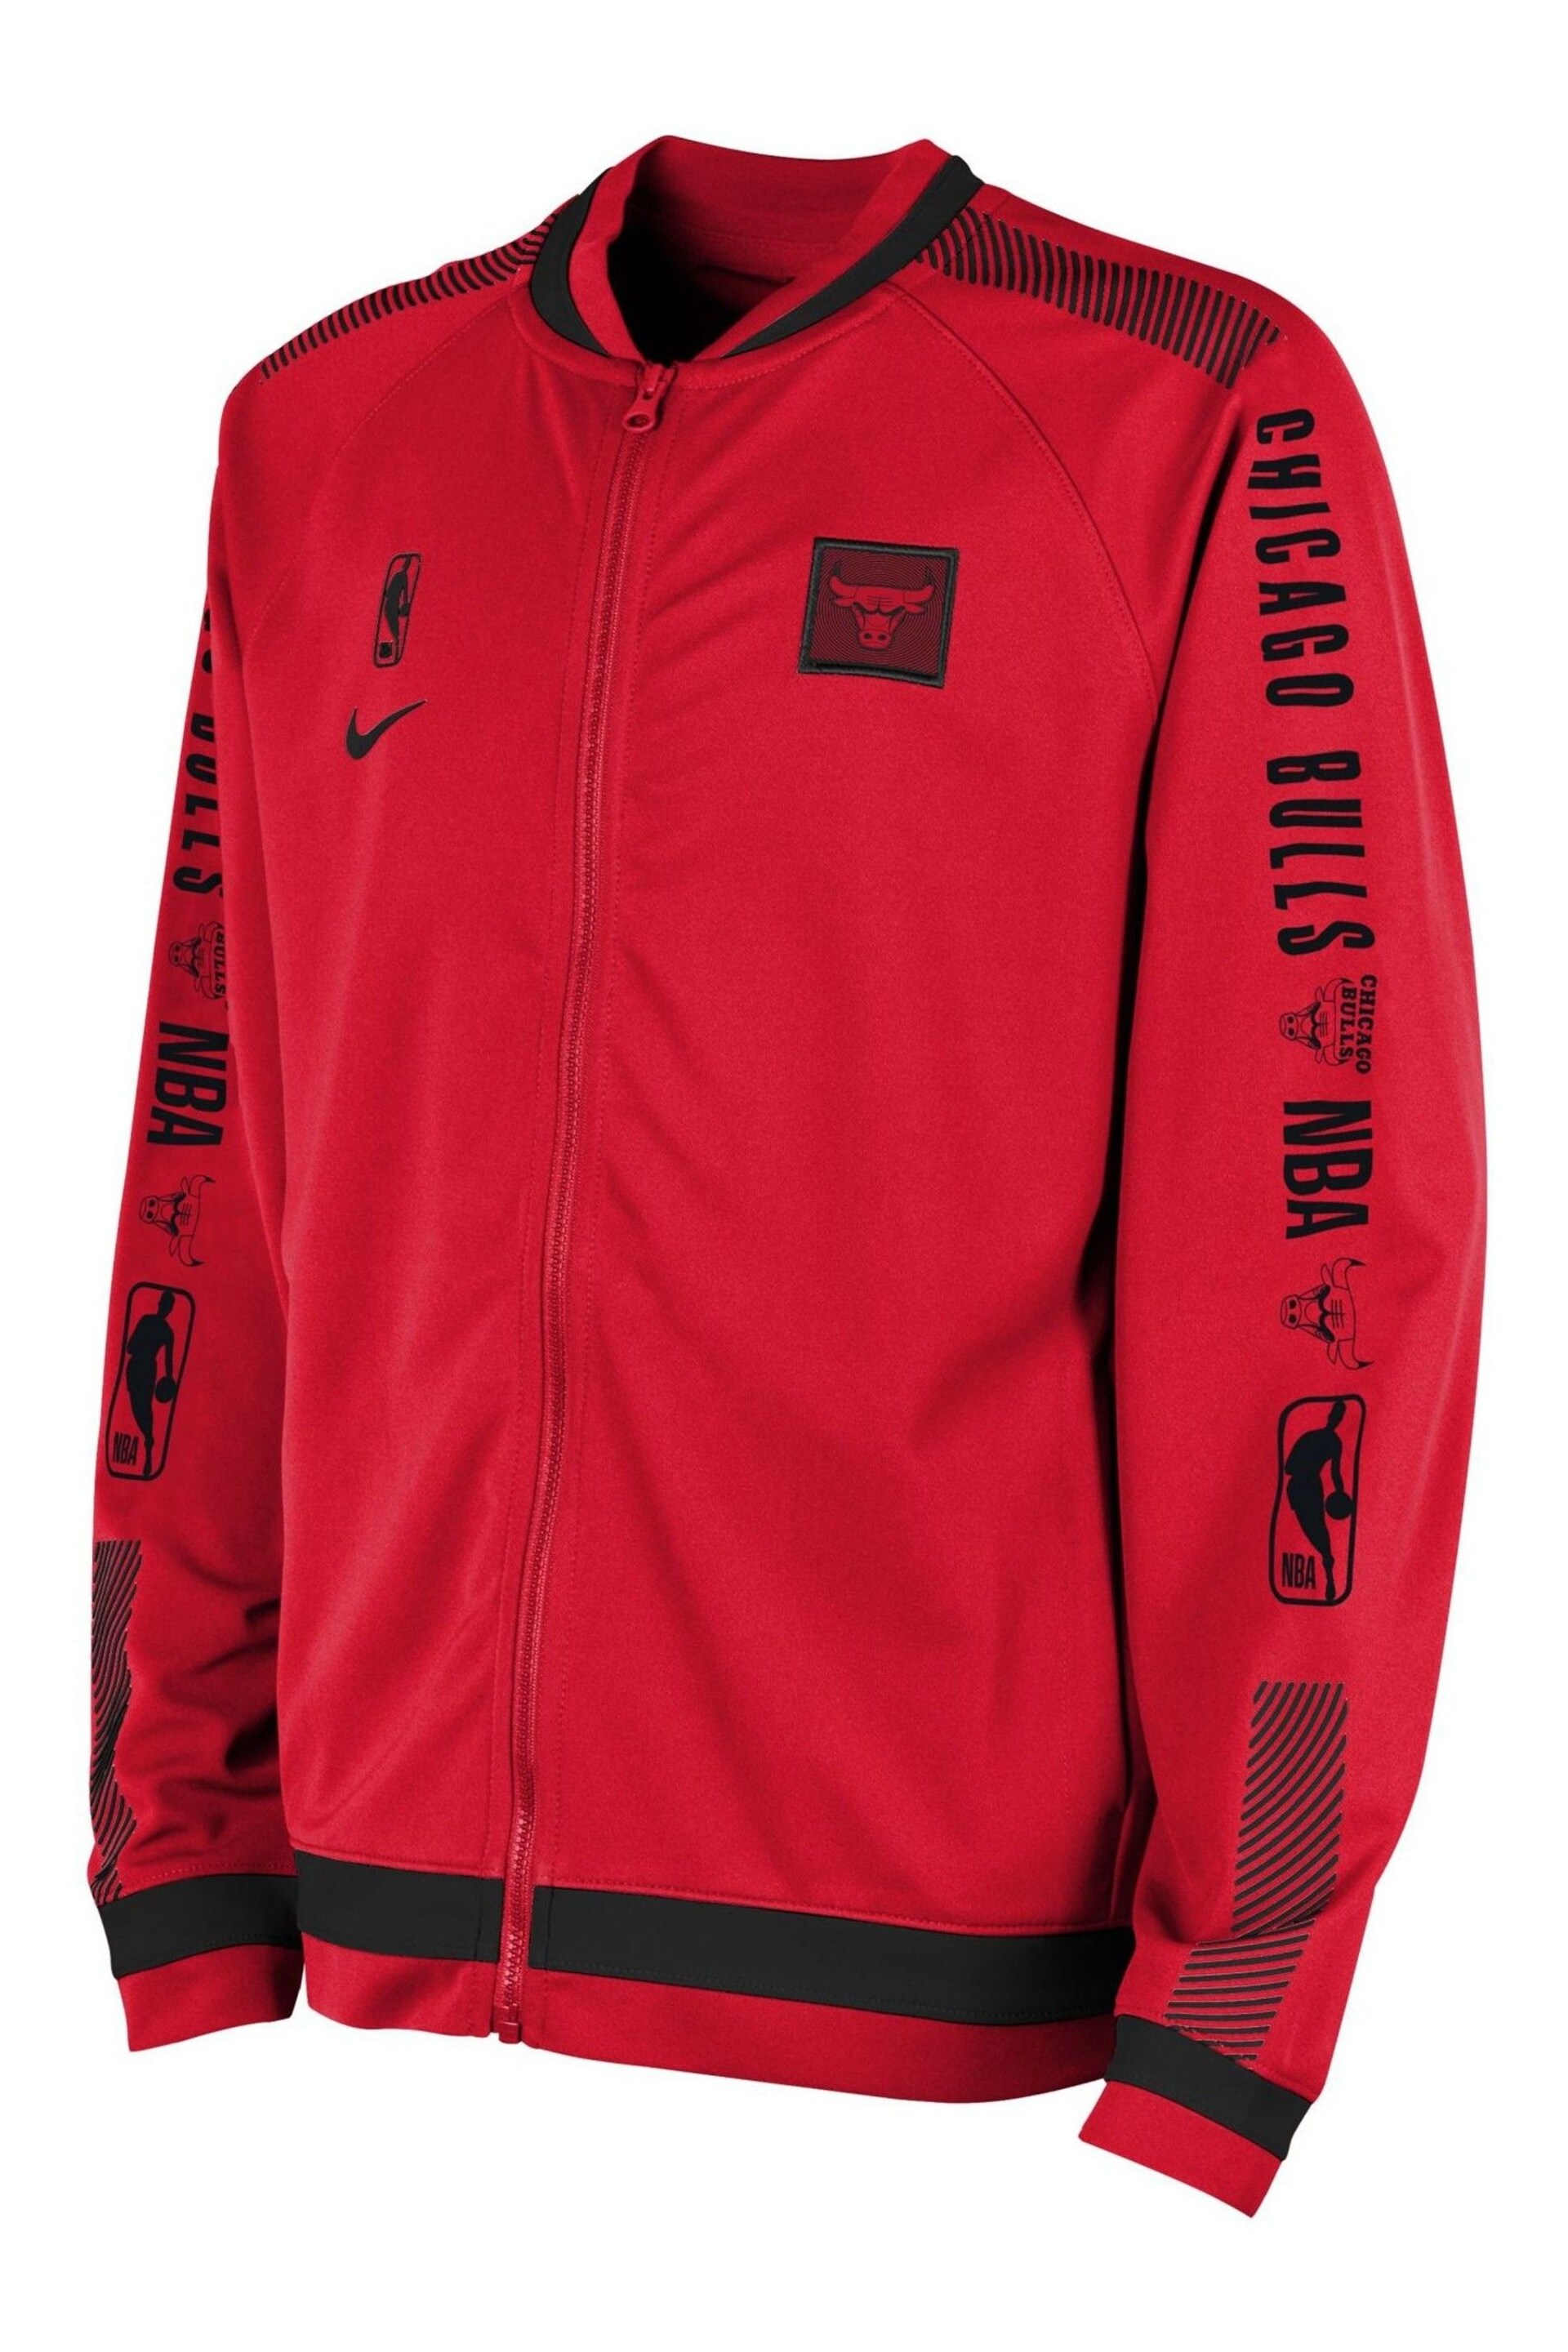 Fanatics Youth Red Chicago Bulls Courtside Tracksuit - Image 2 of 3